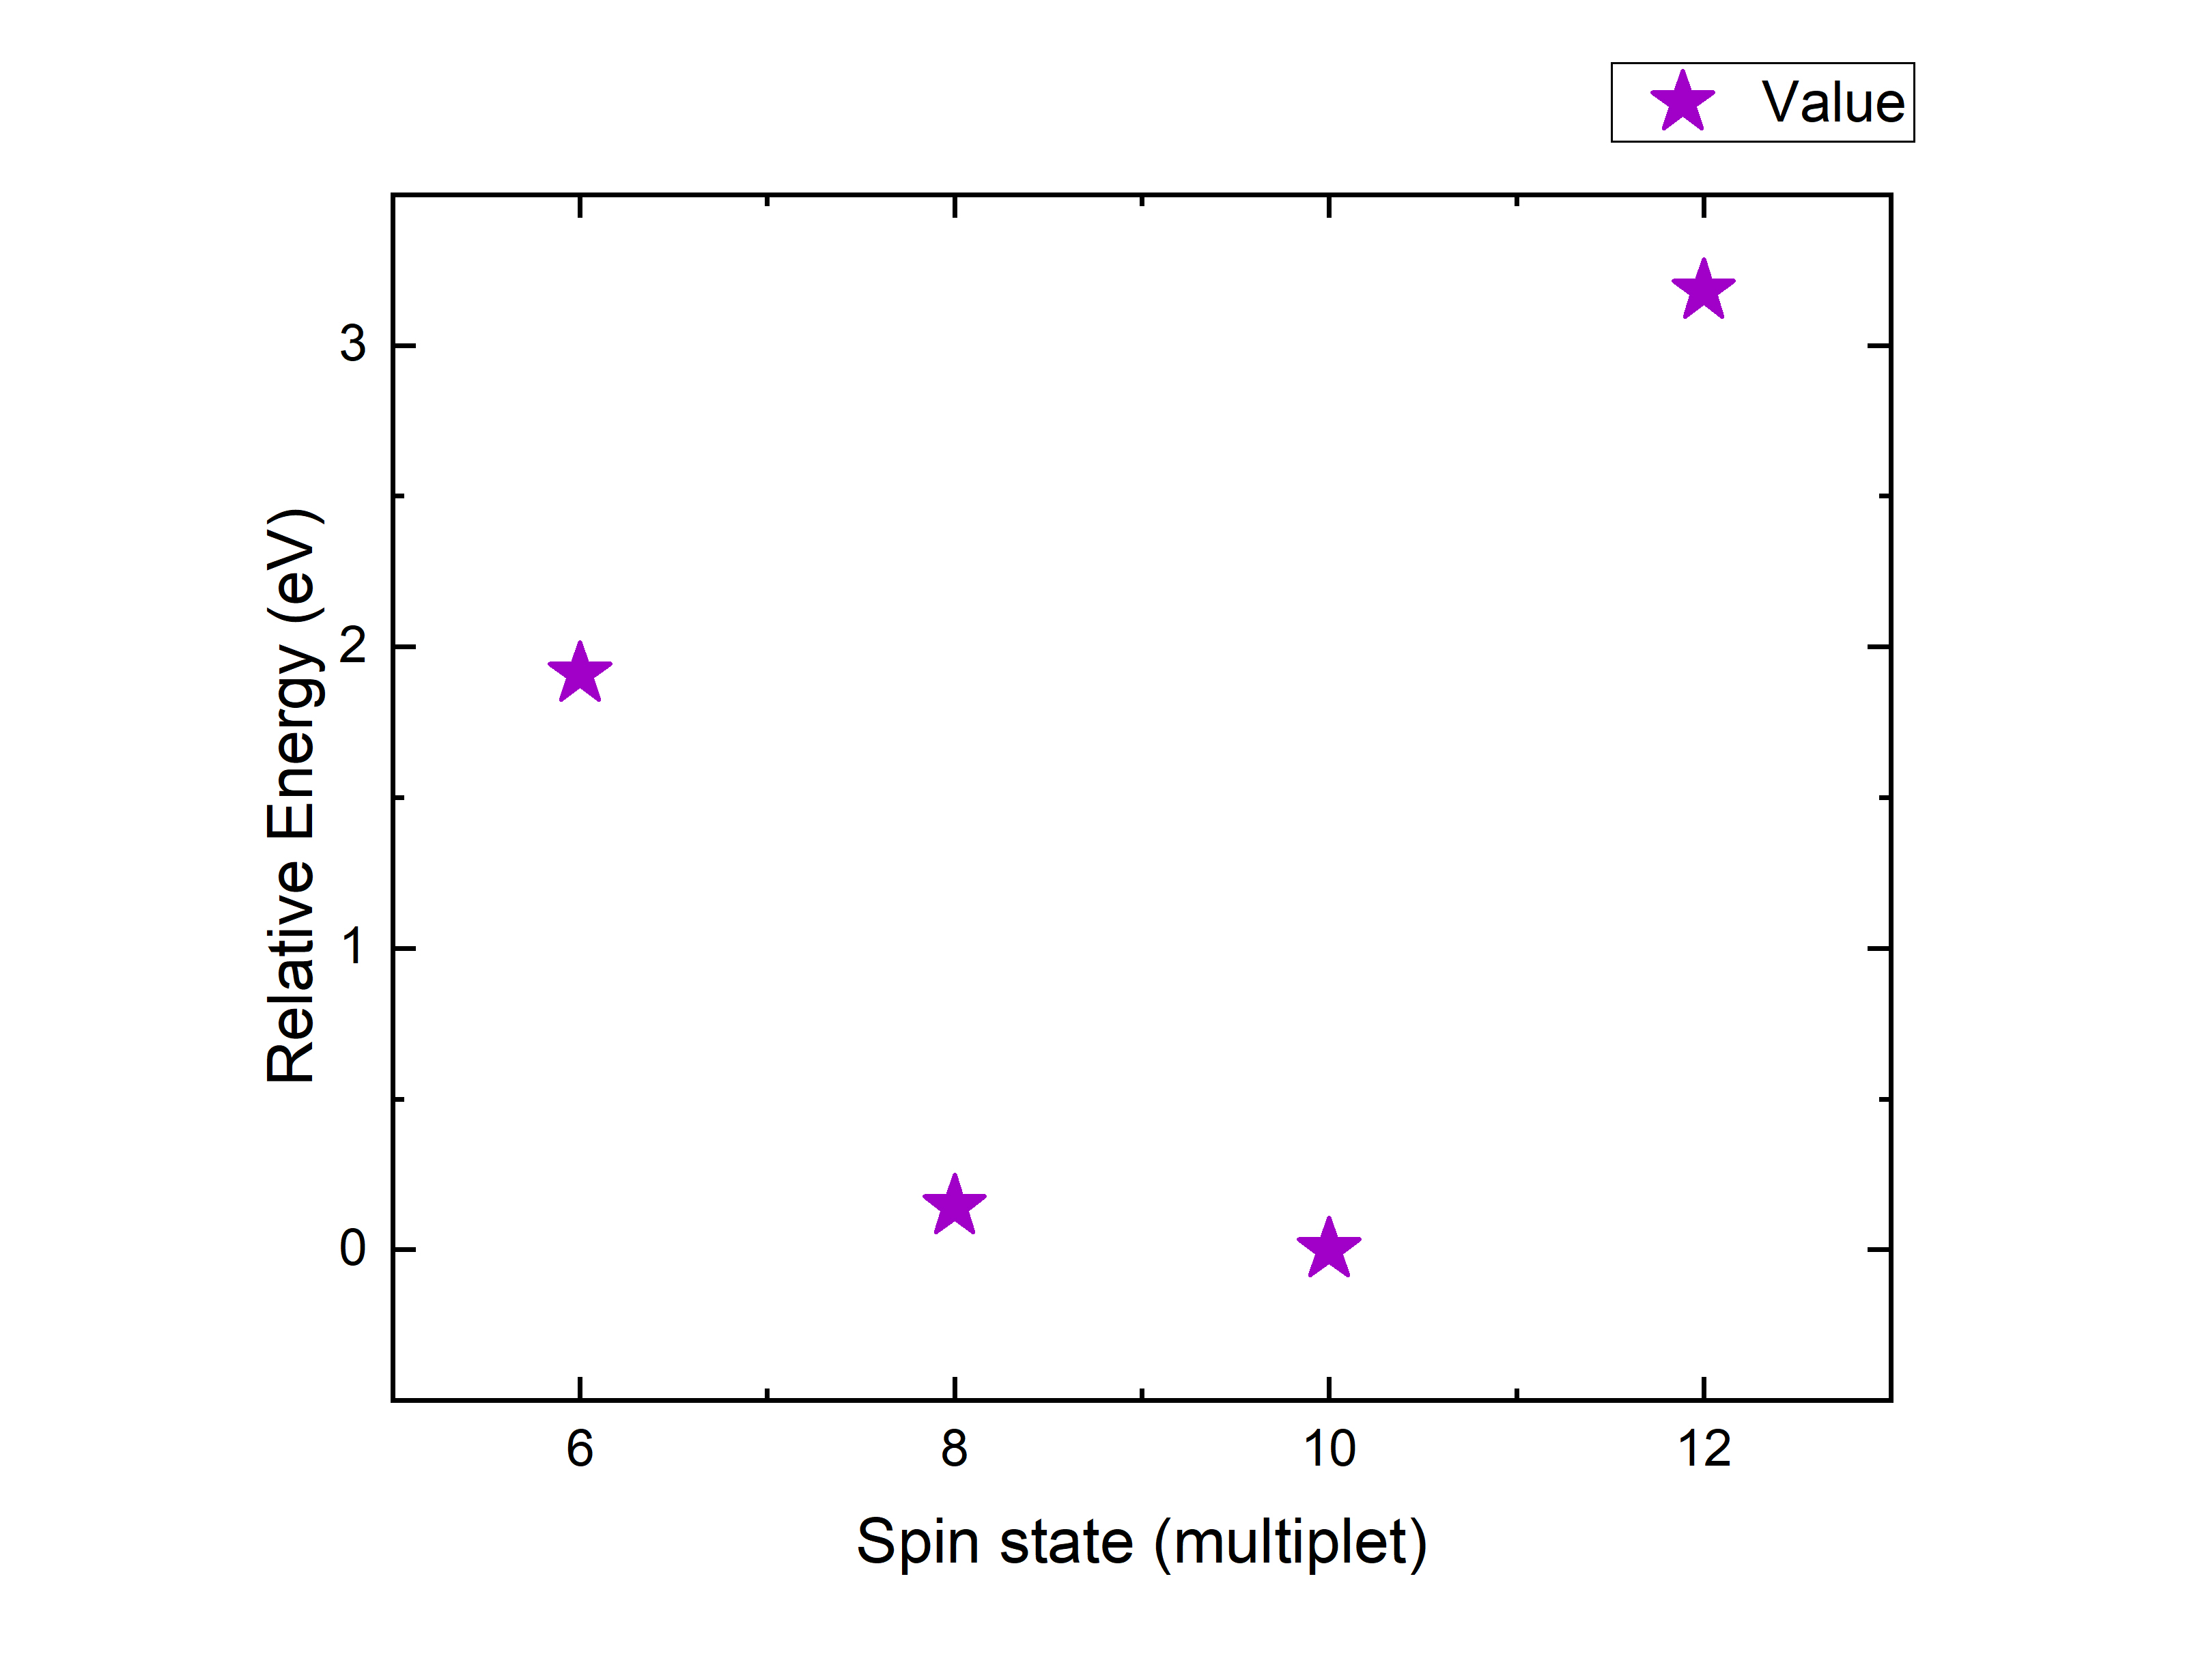 13 spin state occupancy